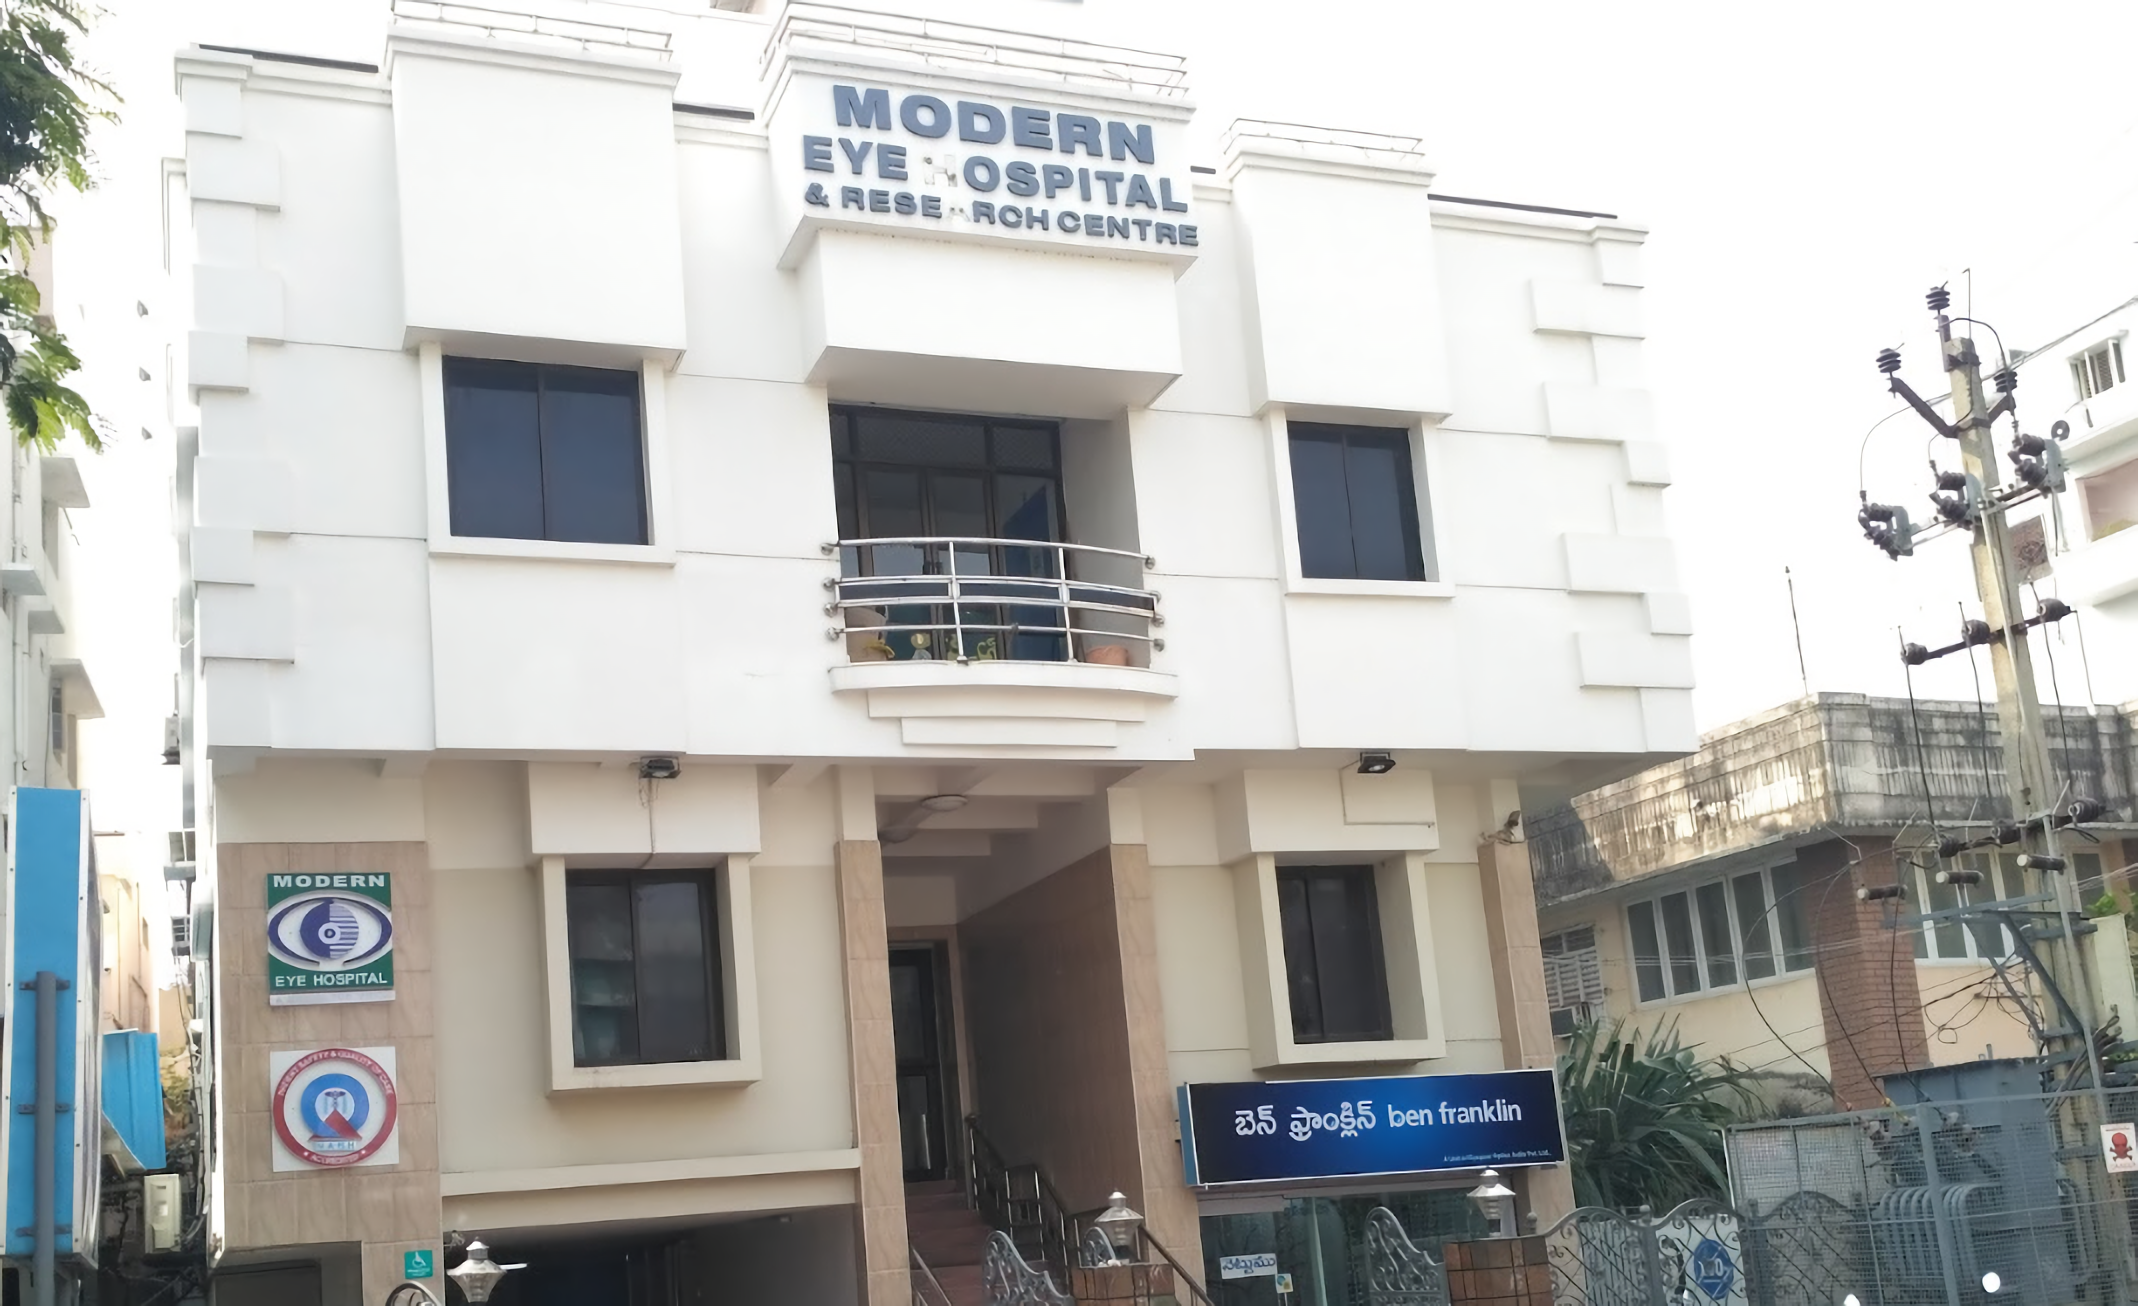 Modern Eye Hospital And Research Centre